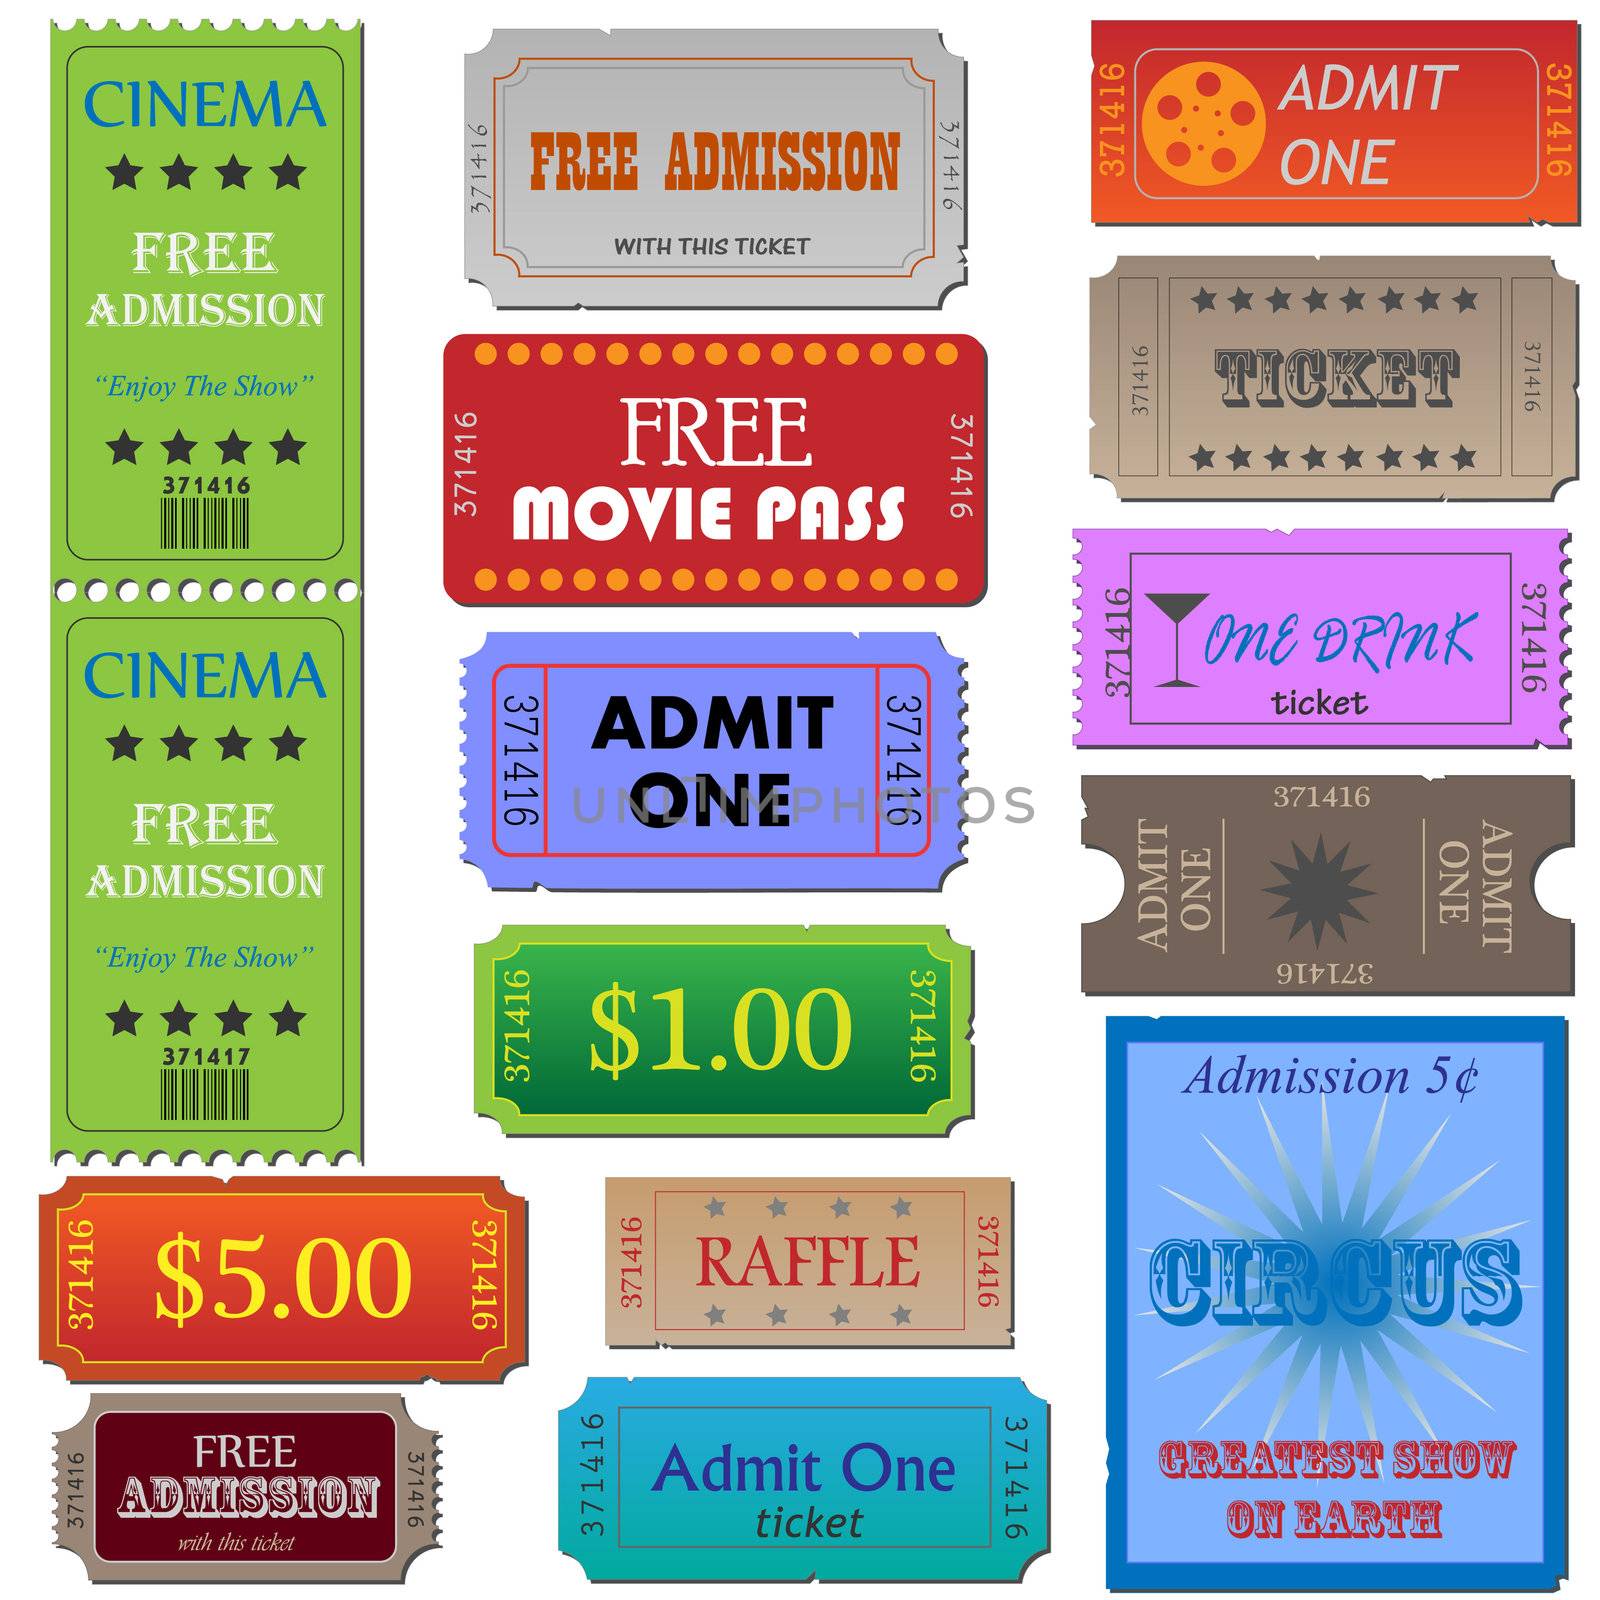 Image of various cinema and admission tickets.